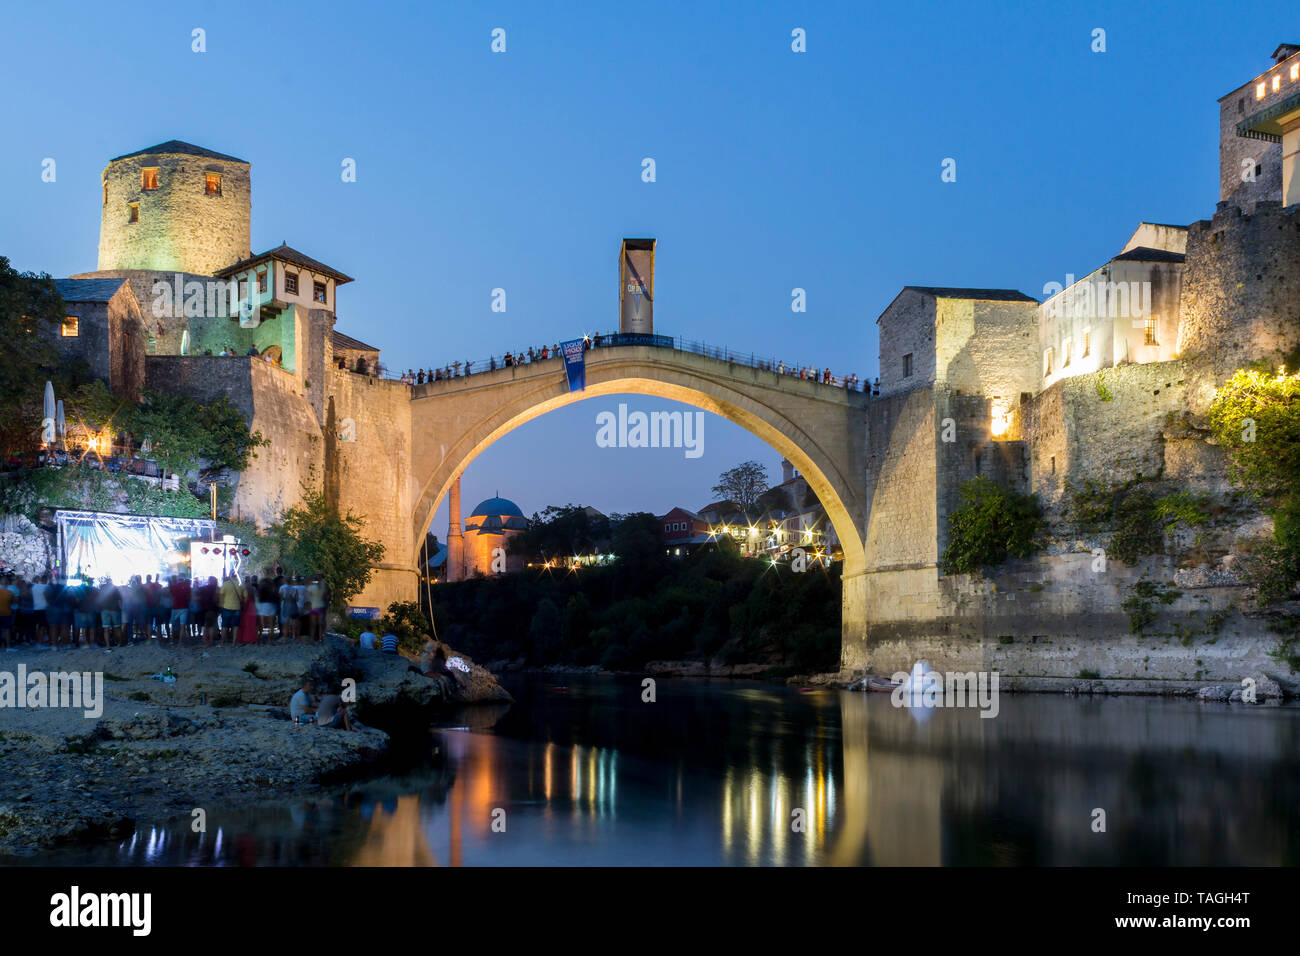 MOSTAR, BOSNIA AND HERZEGOVINA - AUGUST 13, 2015: Dusk photo of Tourist and locals walking near Old bridge in Mostar while there are preparation for R Stock Photo